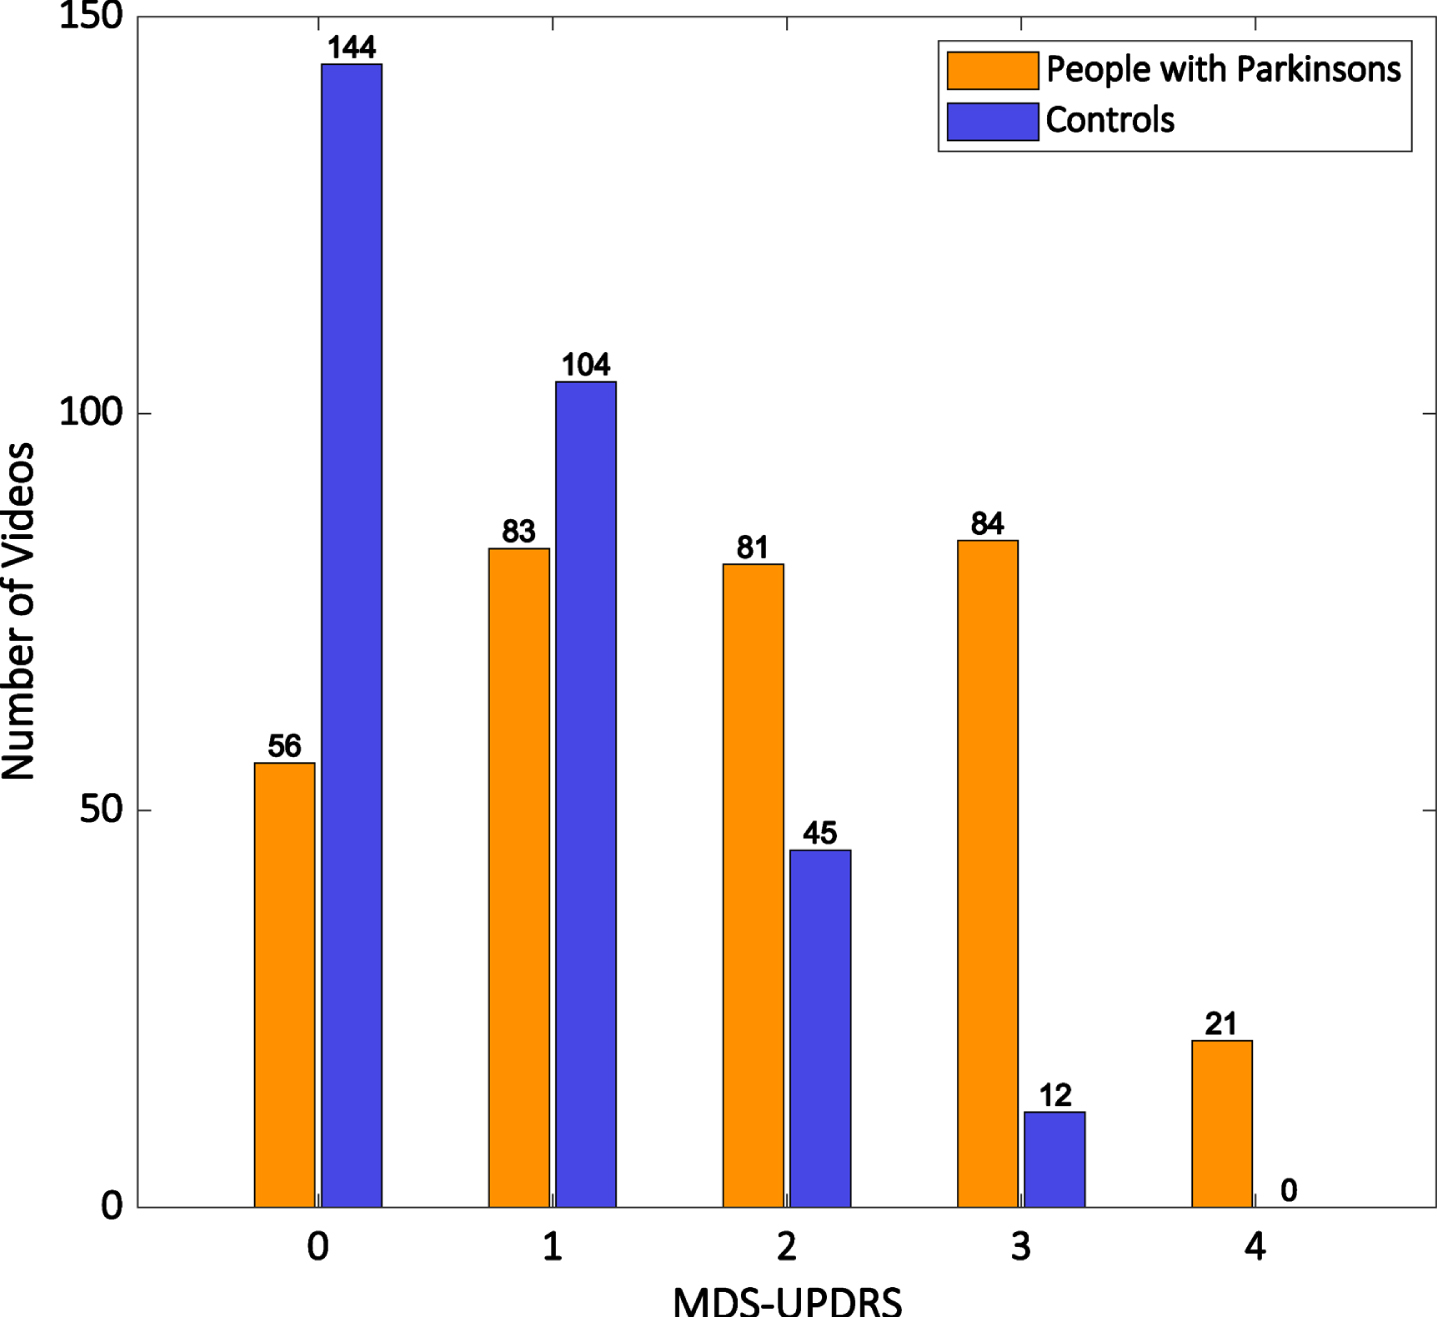 Histogram showing the distribution of MDS-UPDRS finger tapping scores for all ratings of the hands of people with Parkinson’s (orange bars) and control participants (blue bars).